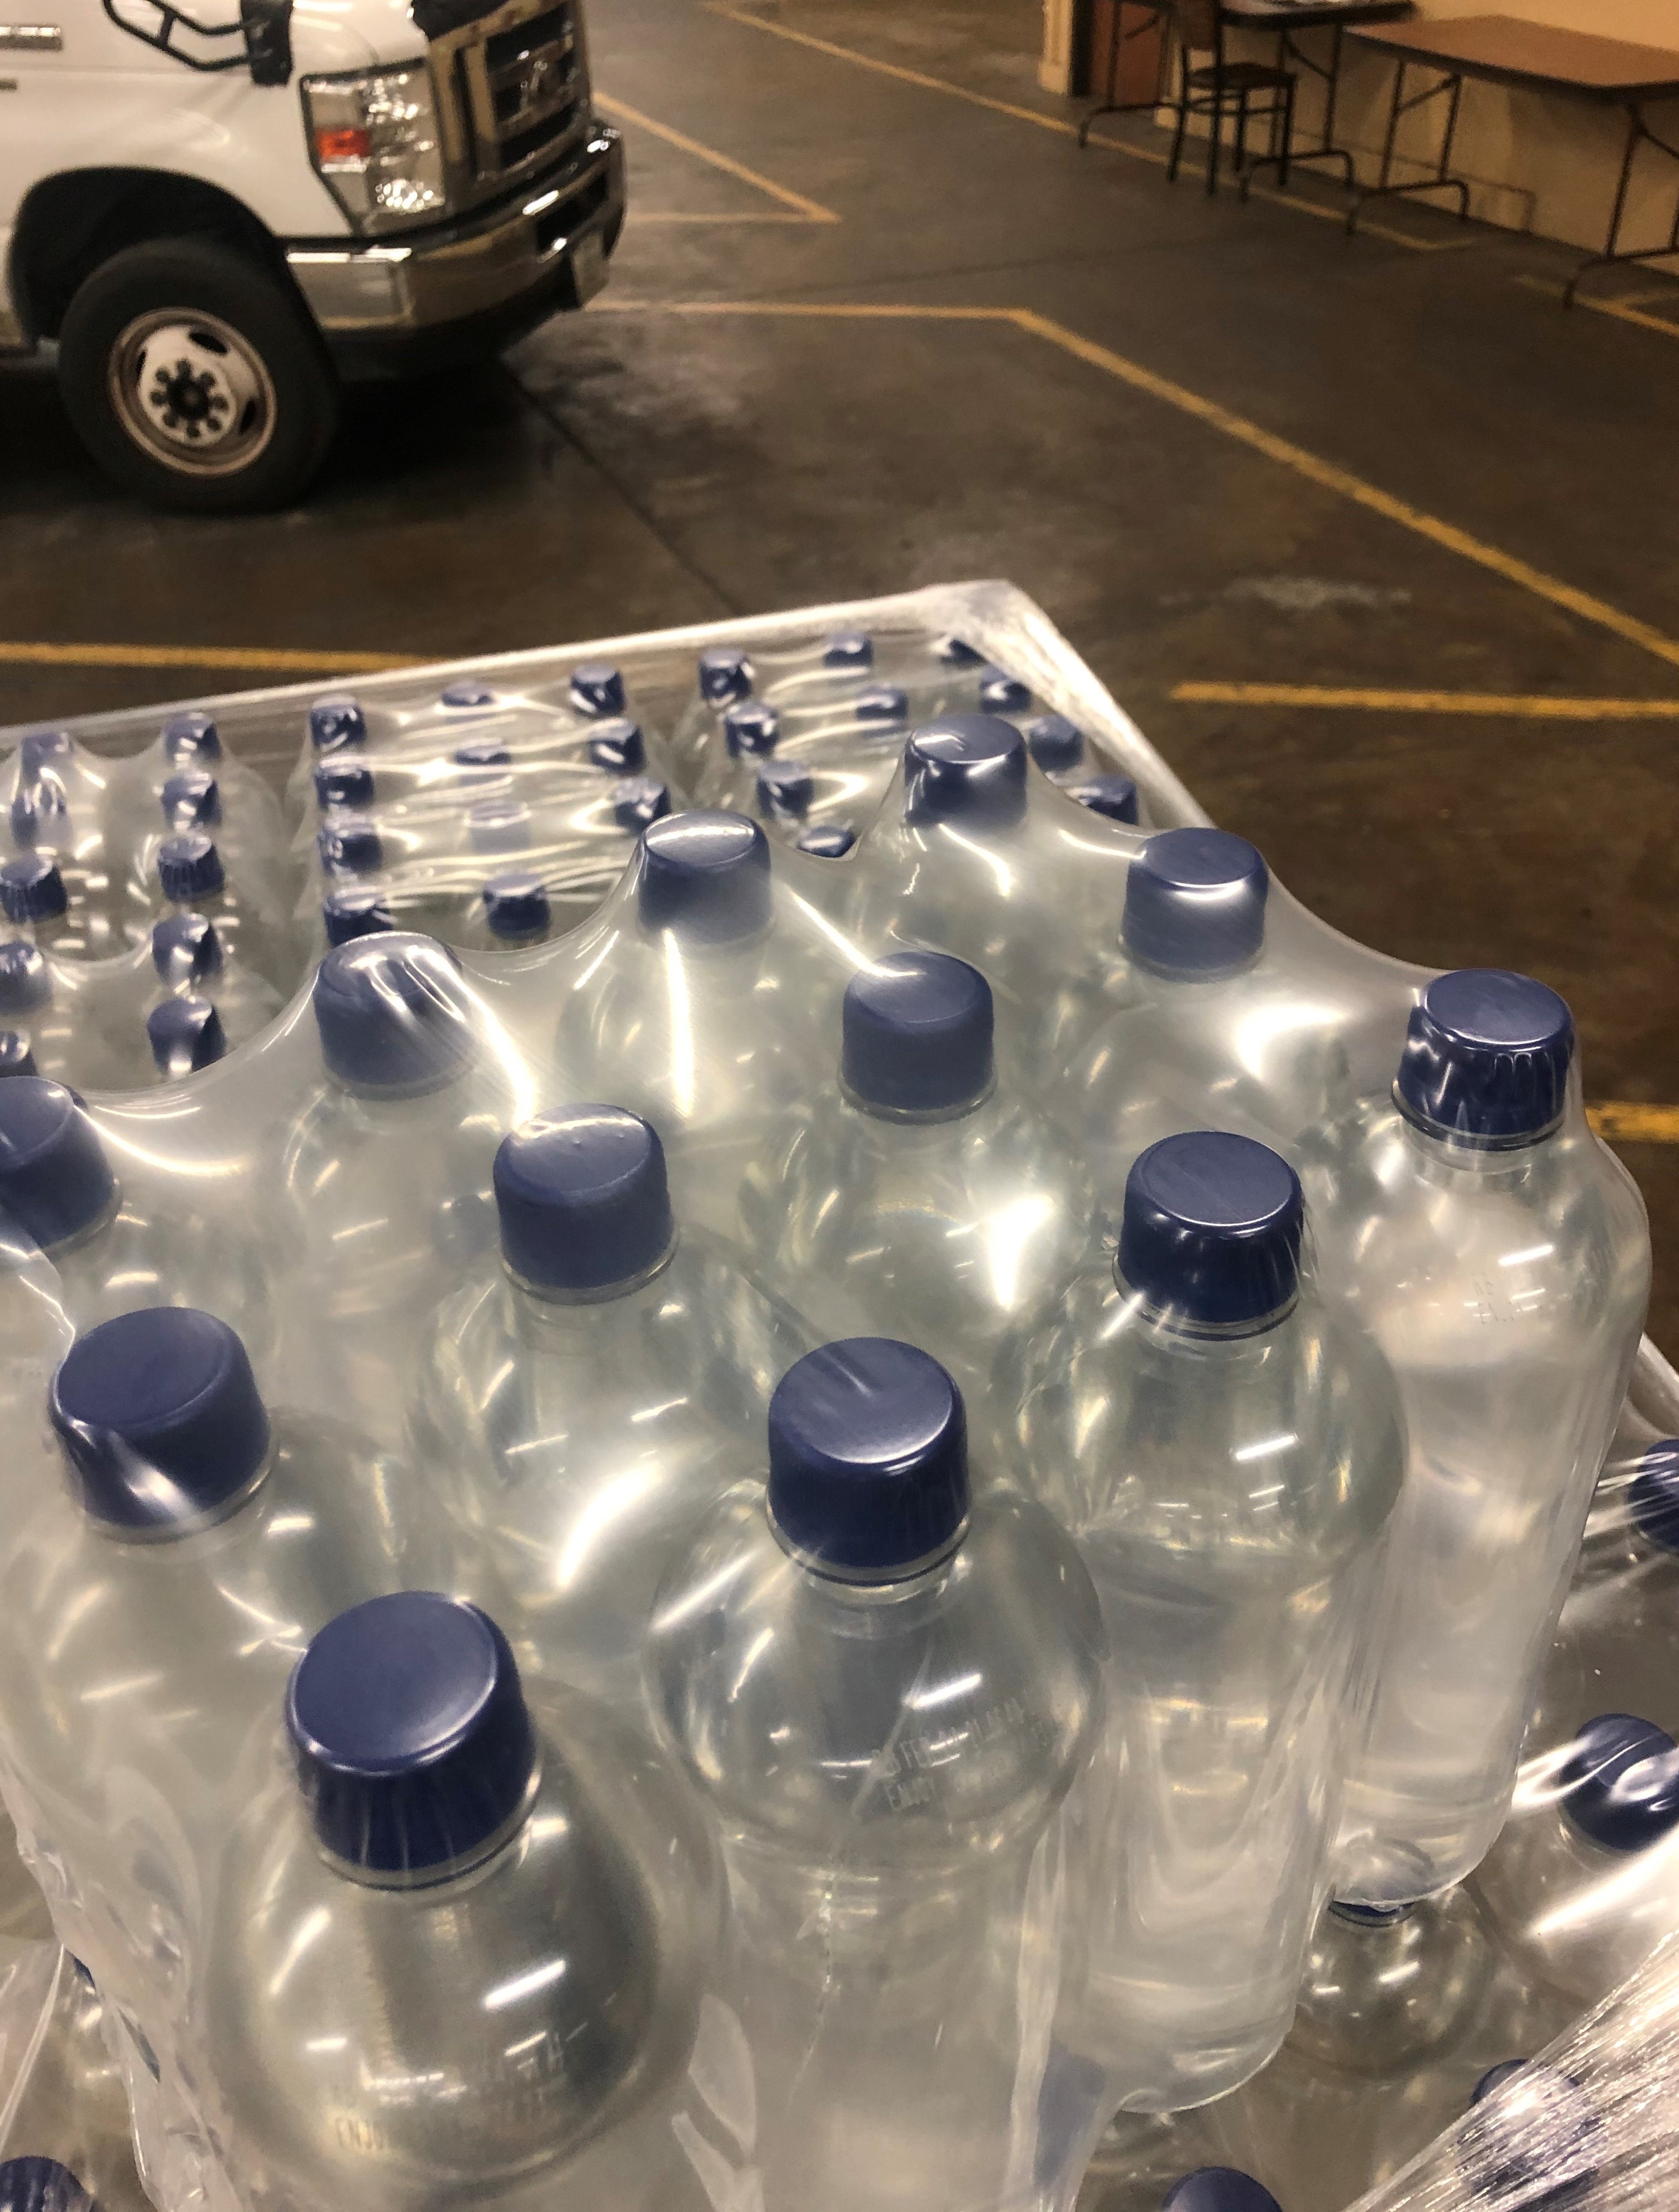 MV Transportation bottled water donation for Texas storm relief